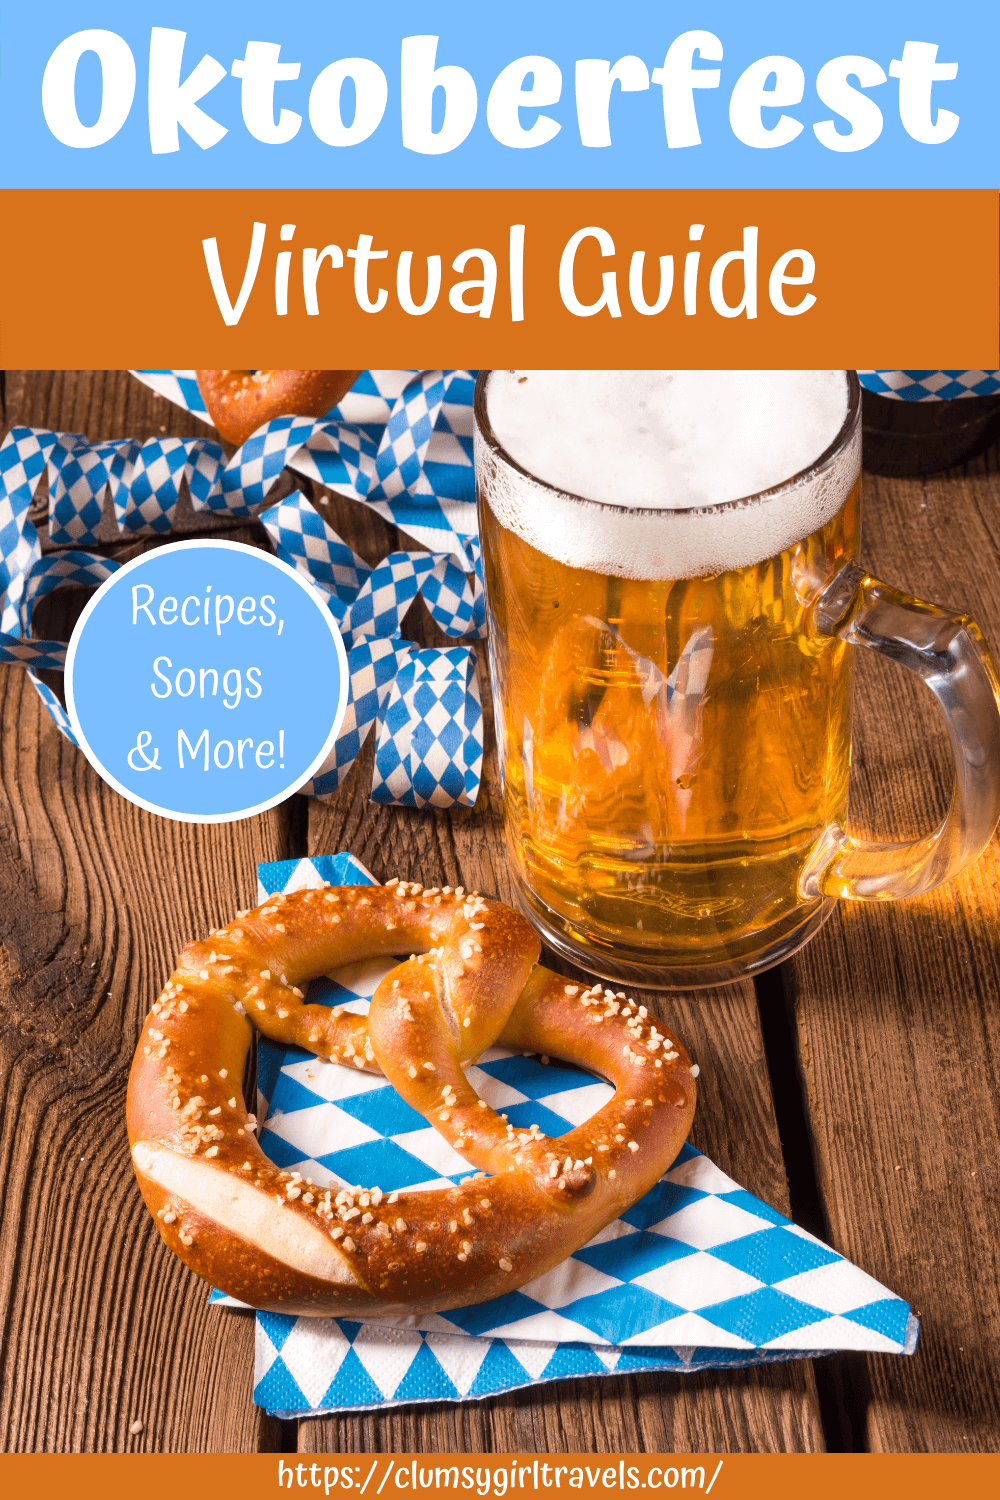 Celebrate Oktoberfest at home with this Oktoberfest virtual guide. Make recipes, drink beer and sing songs at the tops of your lungs.